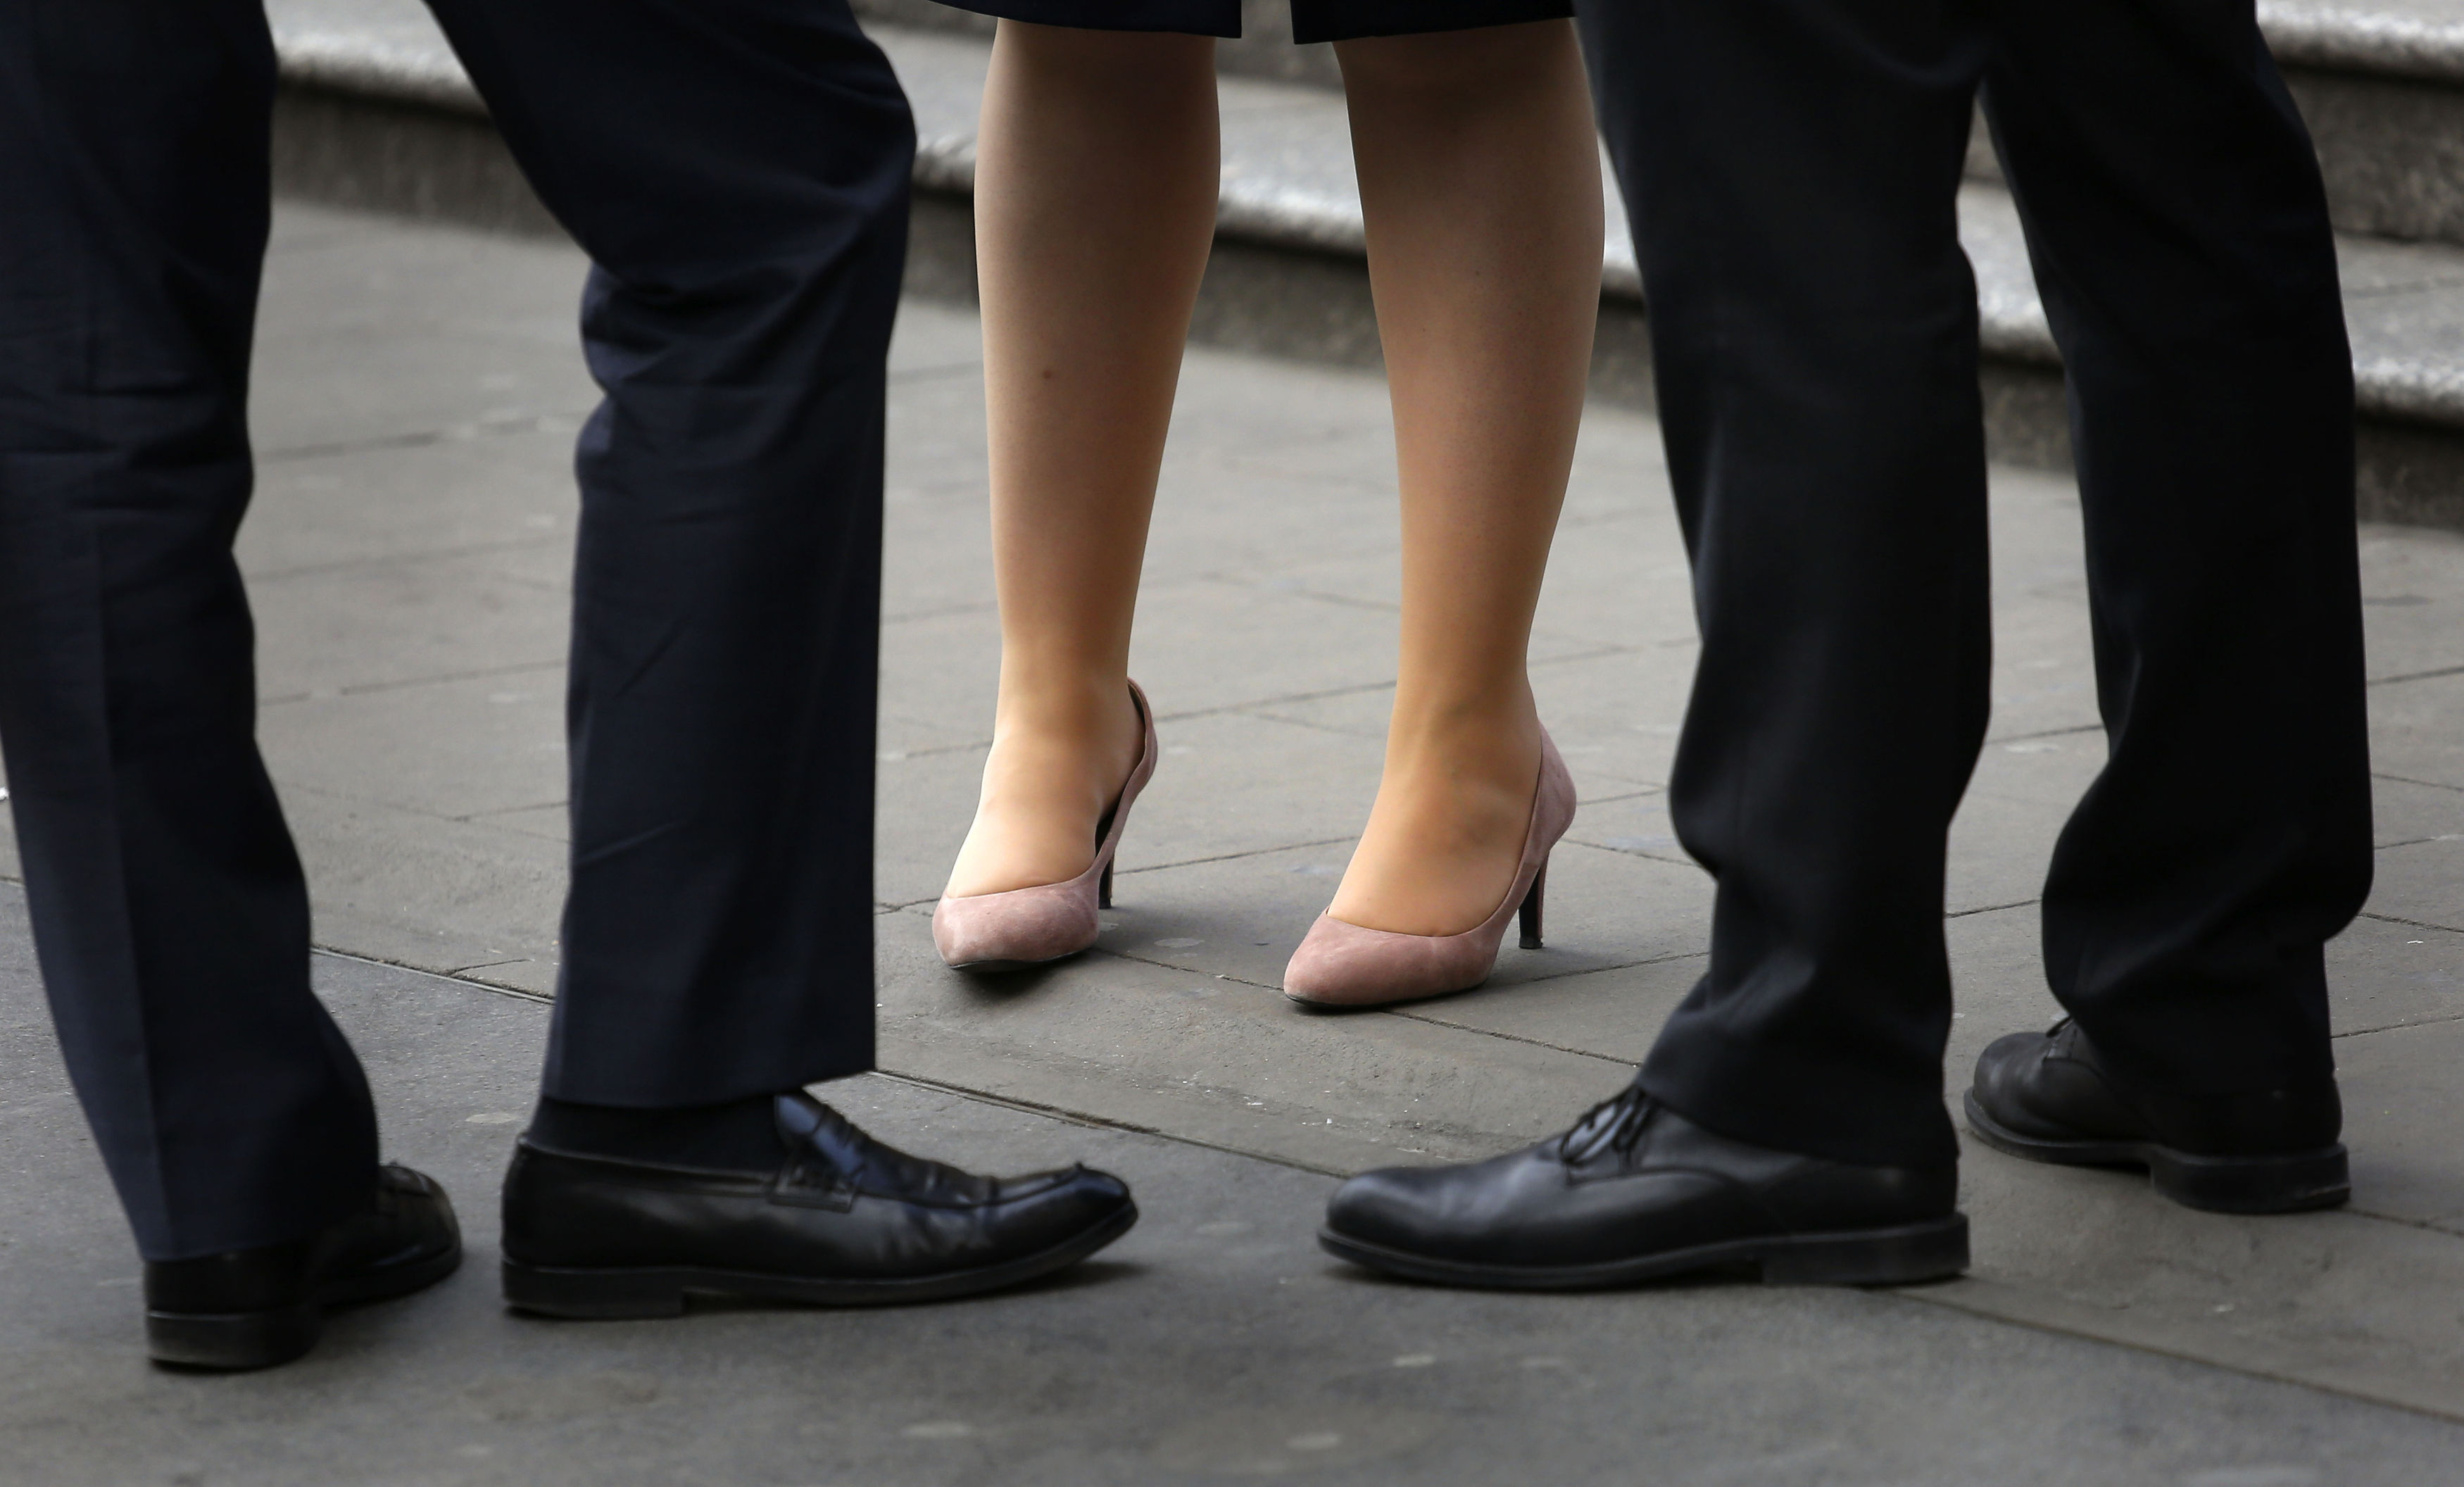 Research by the TUC found that women have effectively been working for free so far this year because of the gender pay gap. (Philip Toscano/PA Wire)